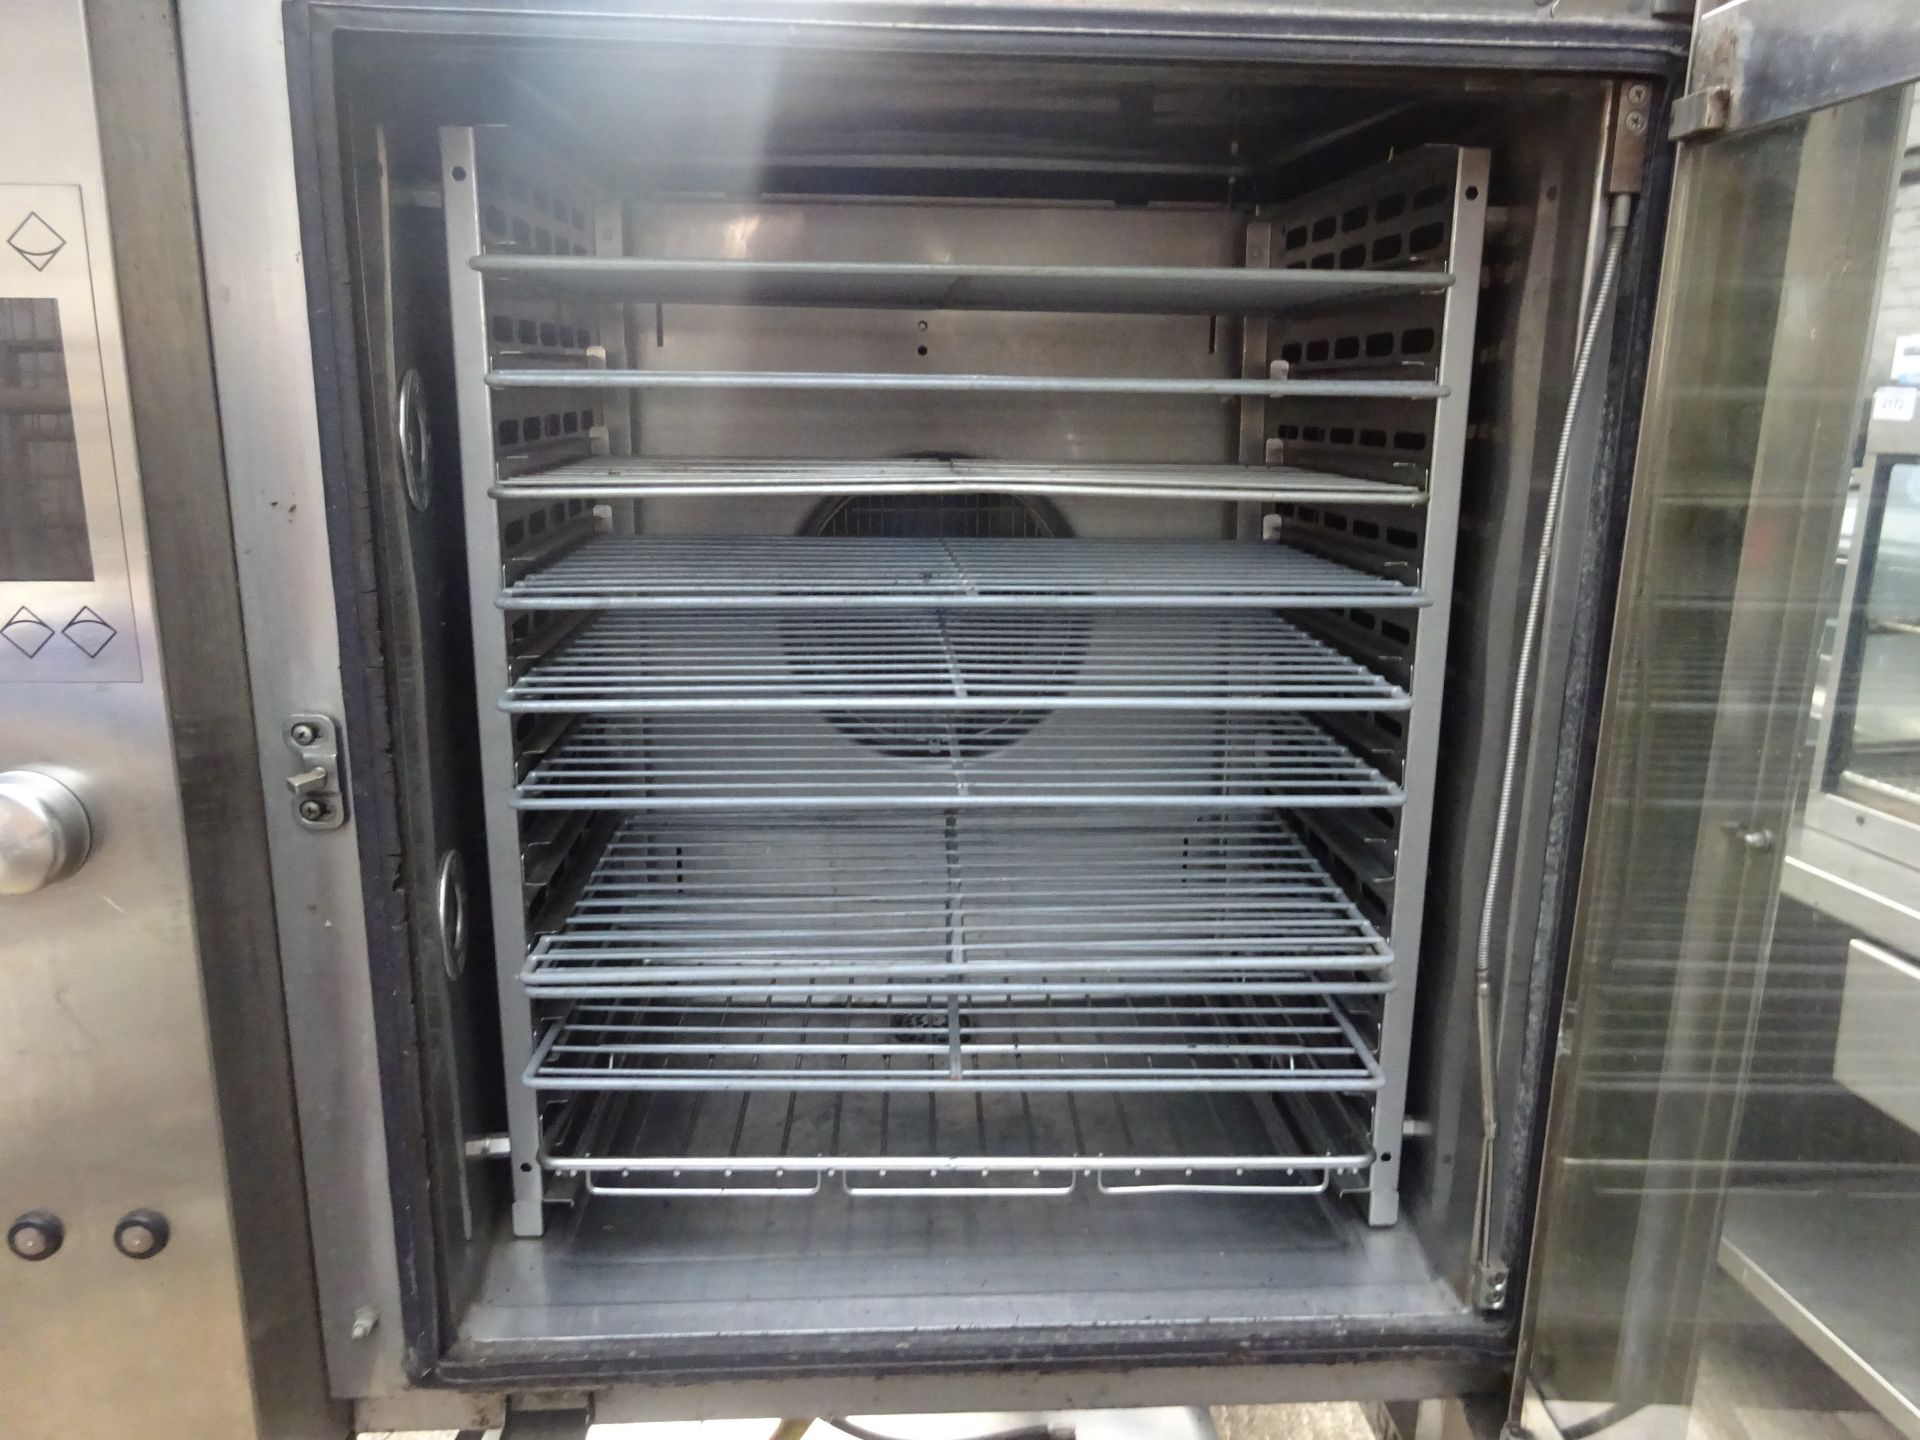 Zanussi ten grid gas combi oven on stand - Image 2 of 2